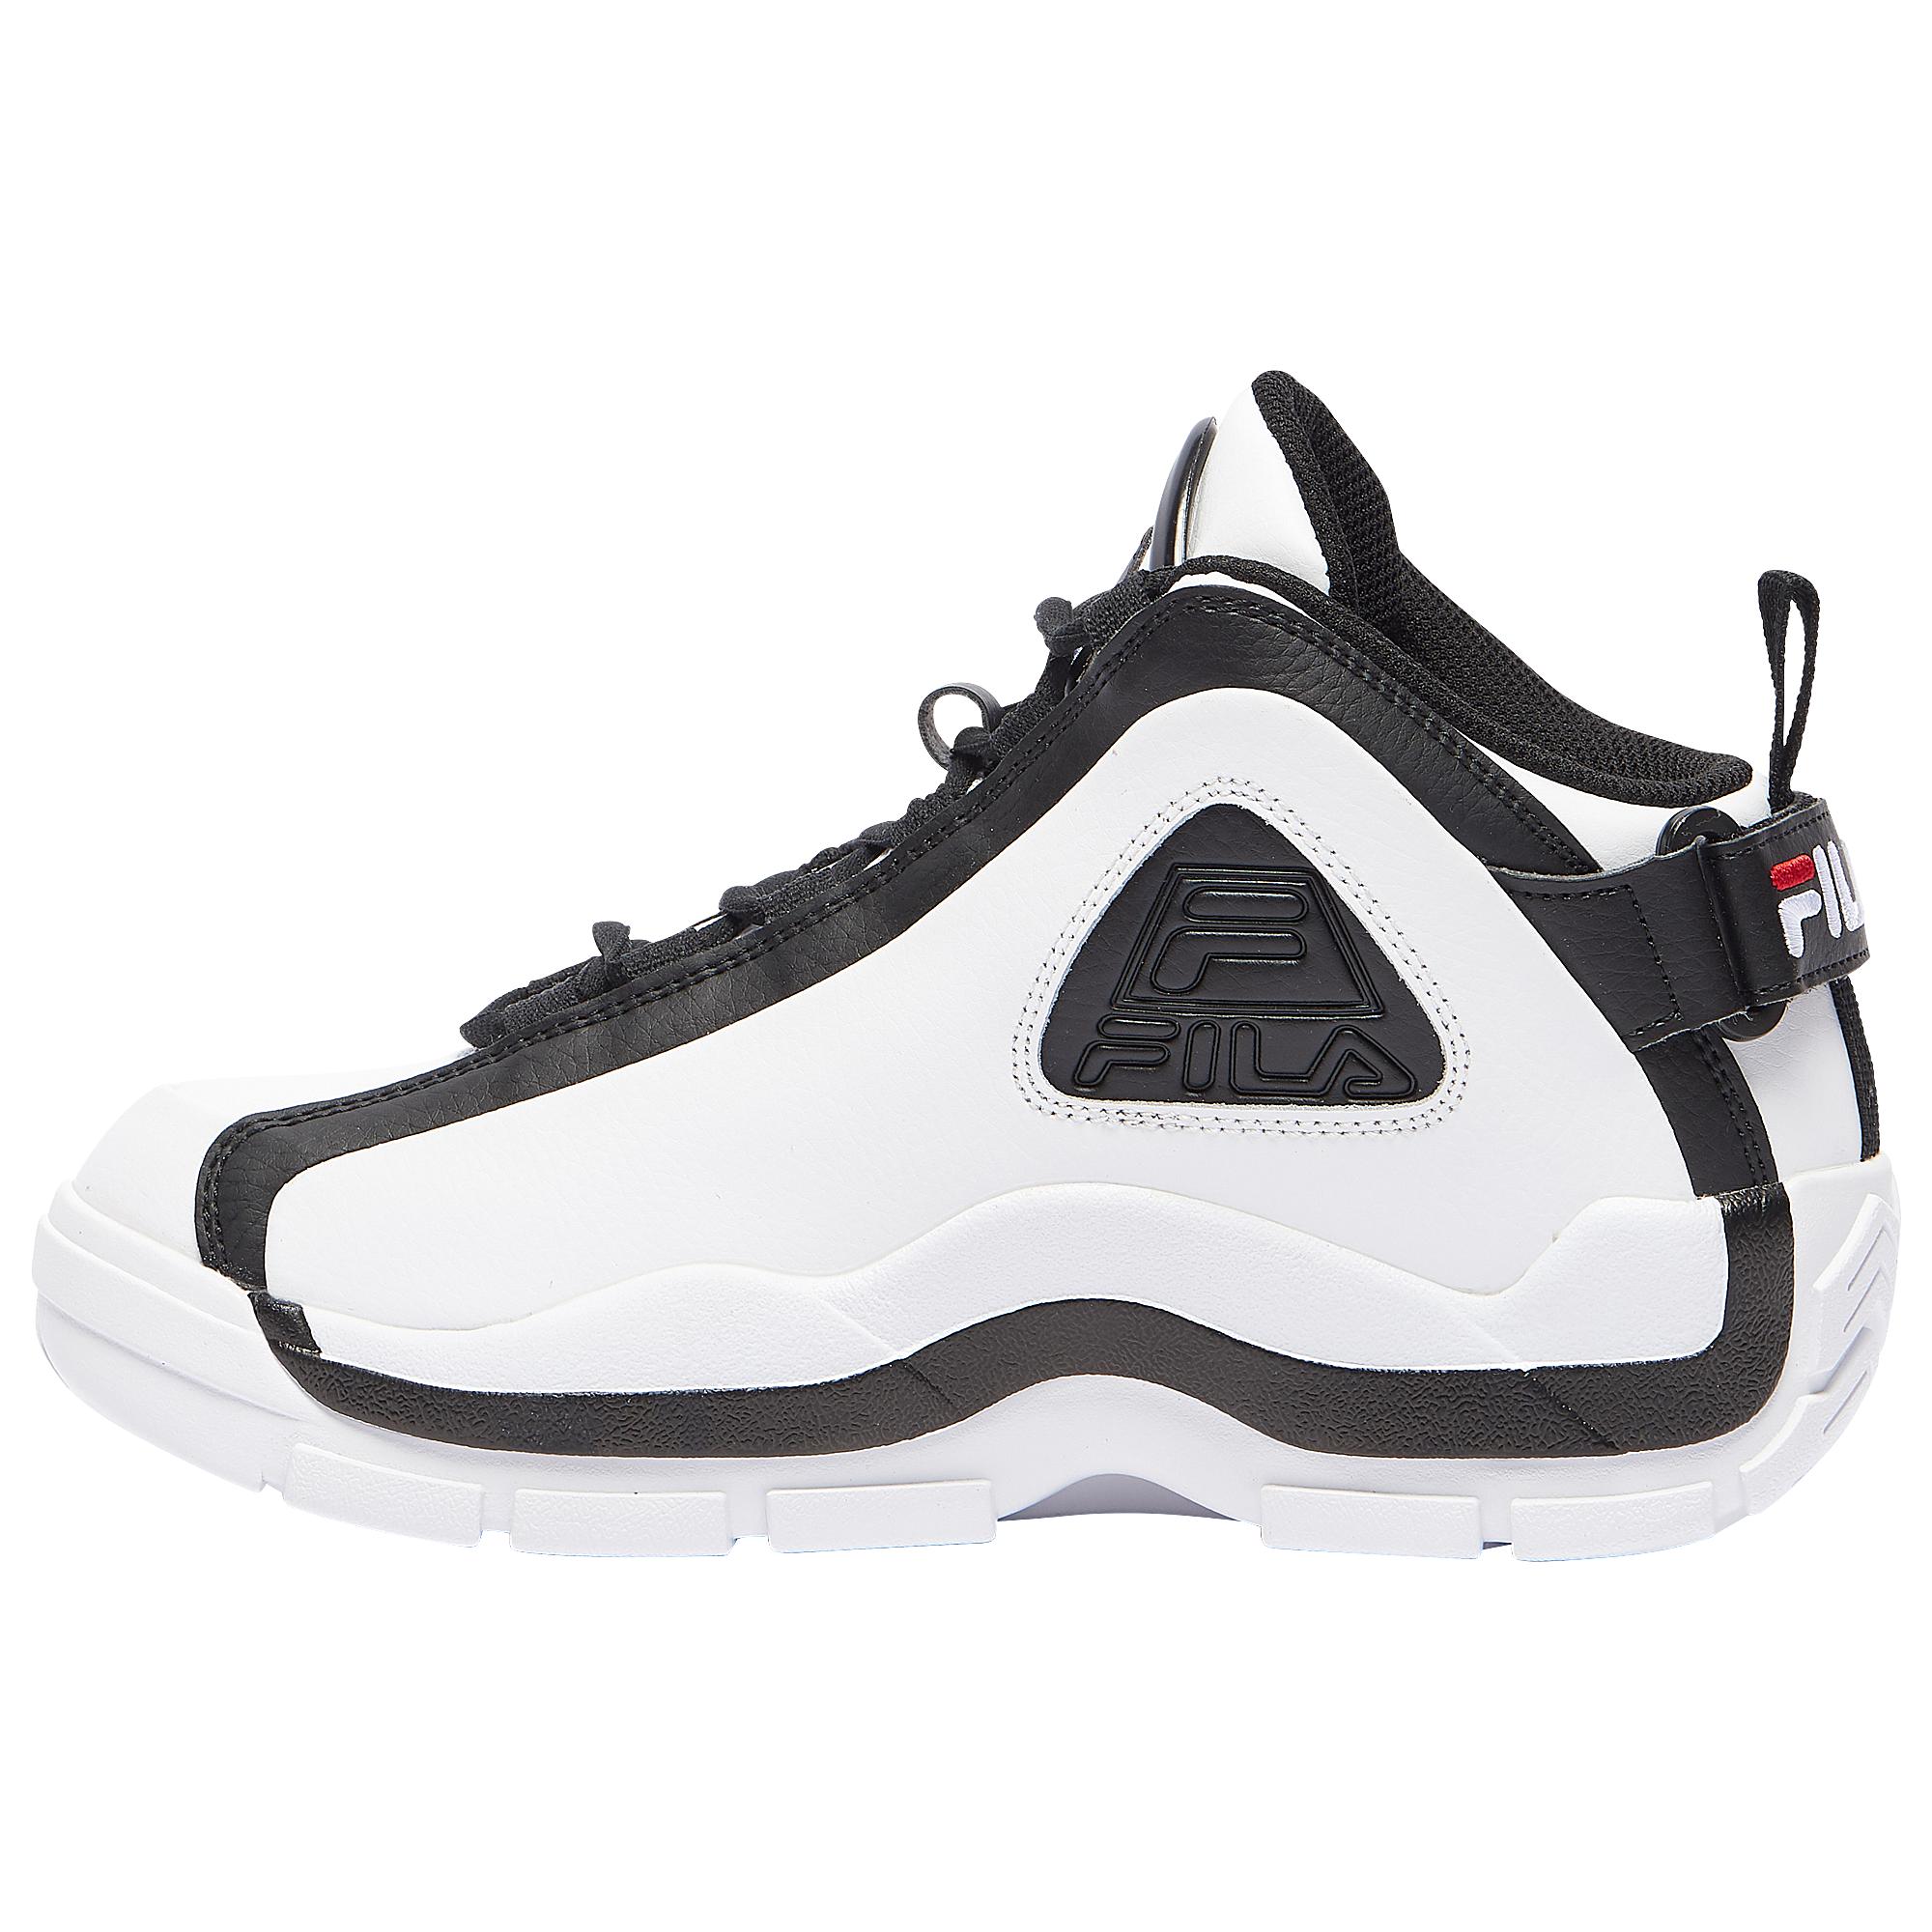 Fila Leather Grant Hill 2 Mid Basketball Shoes in White/Black Red ...